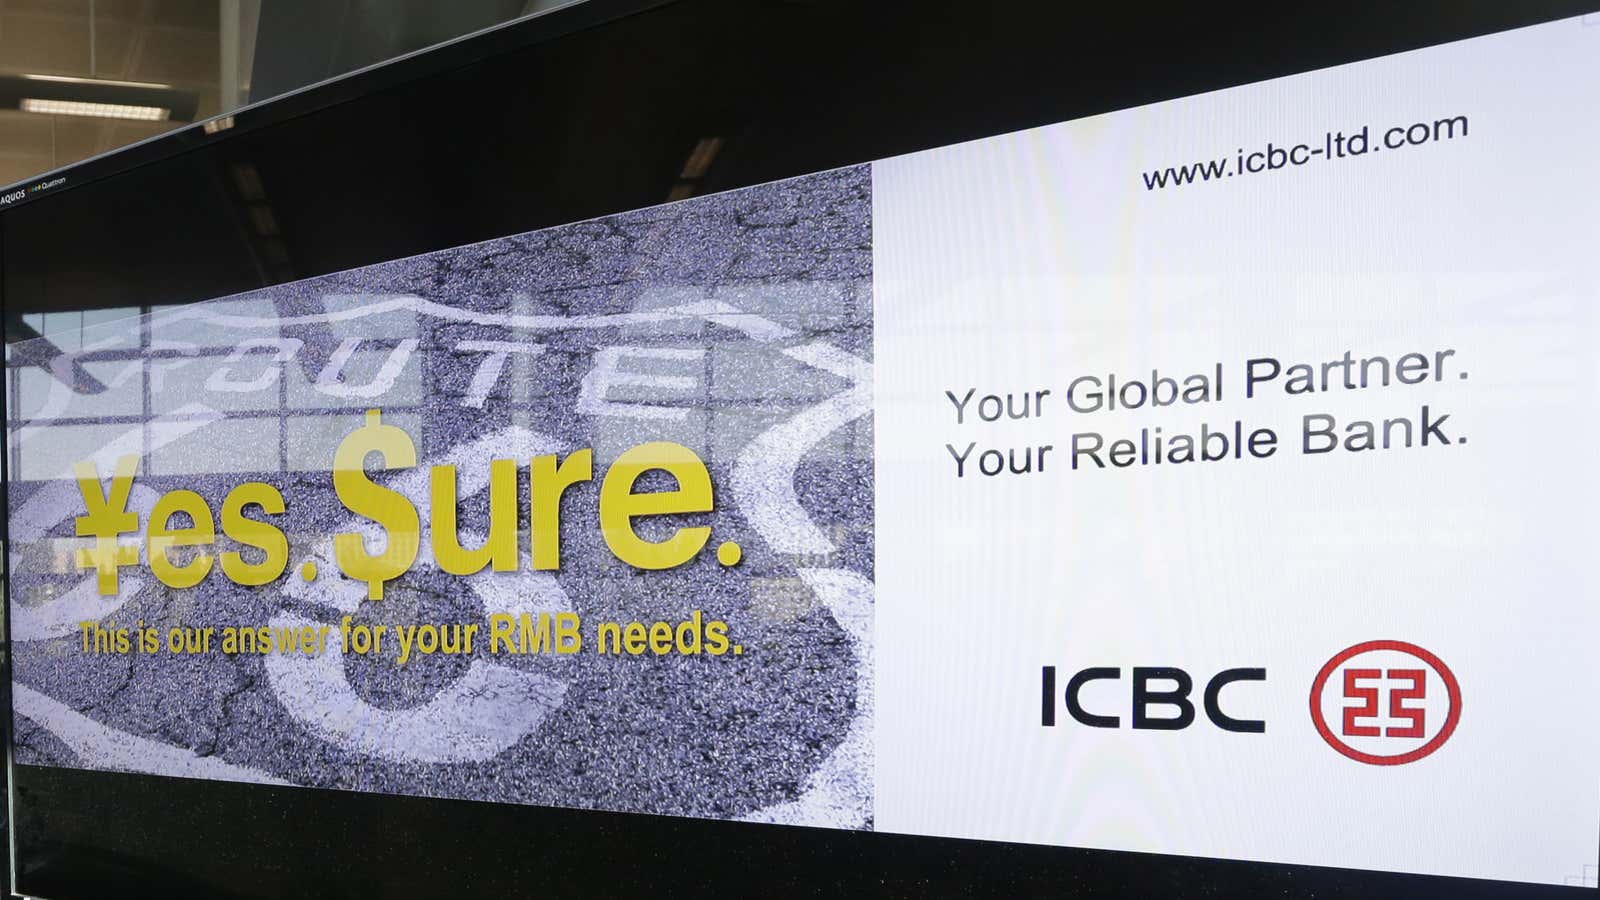 ICBC: Now more “reliable” than ever.